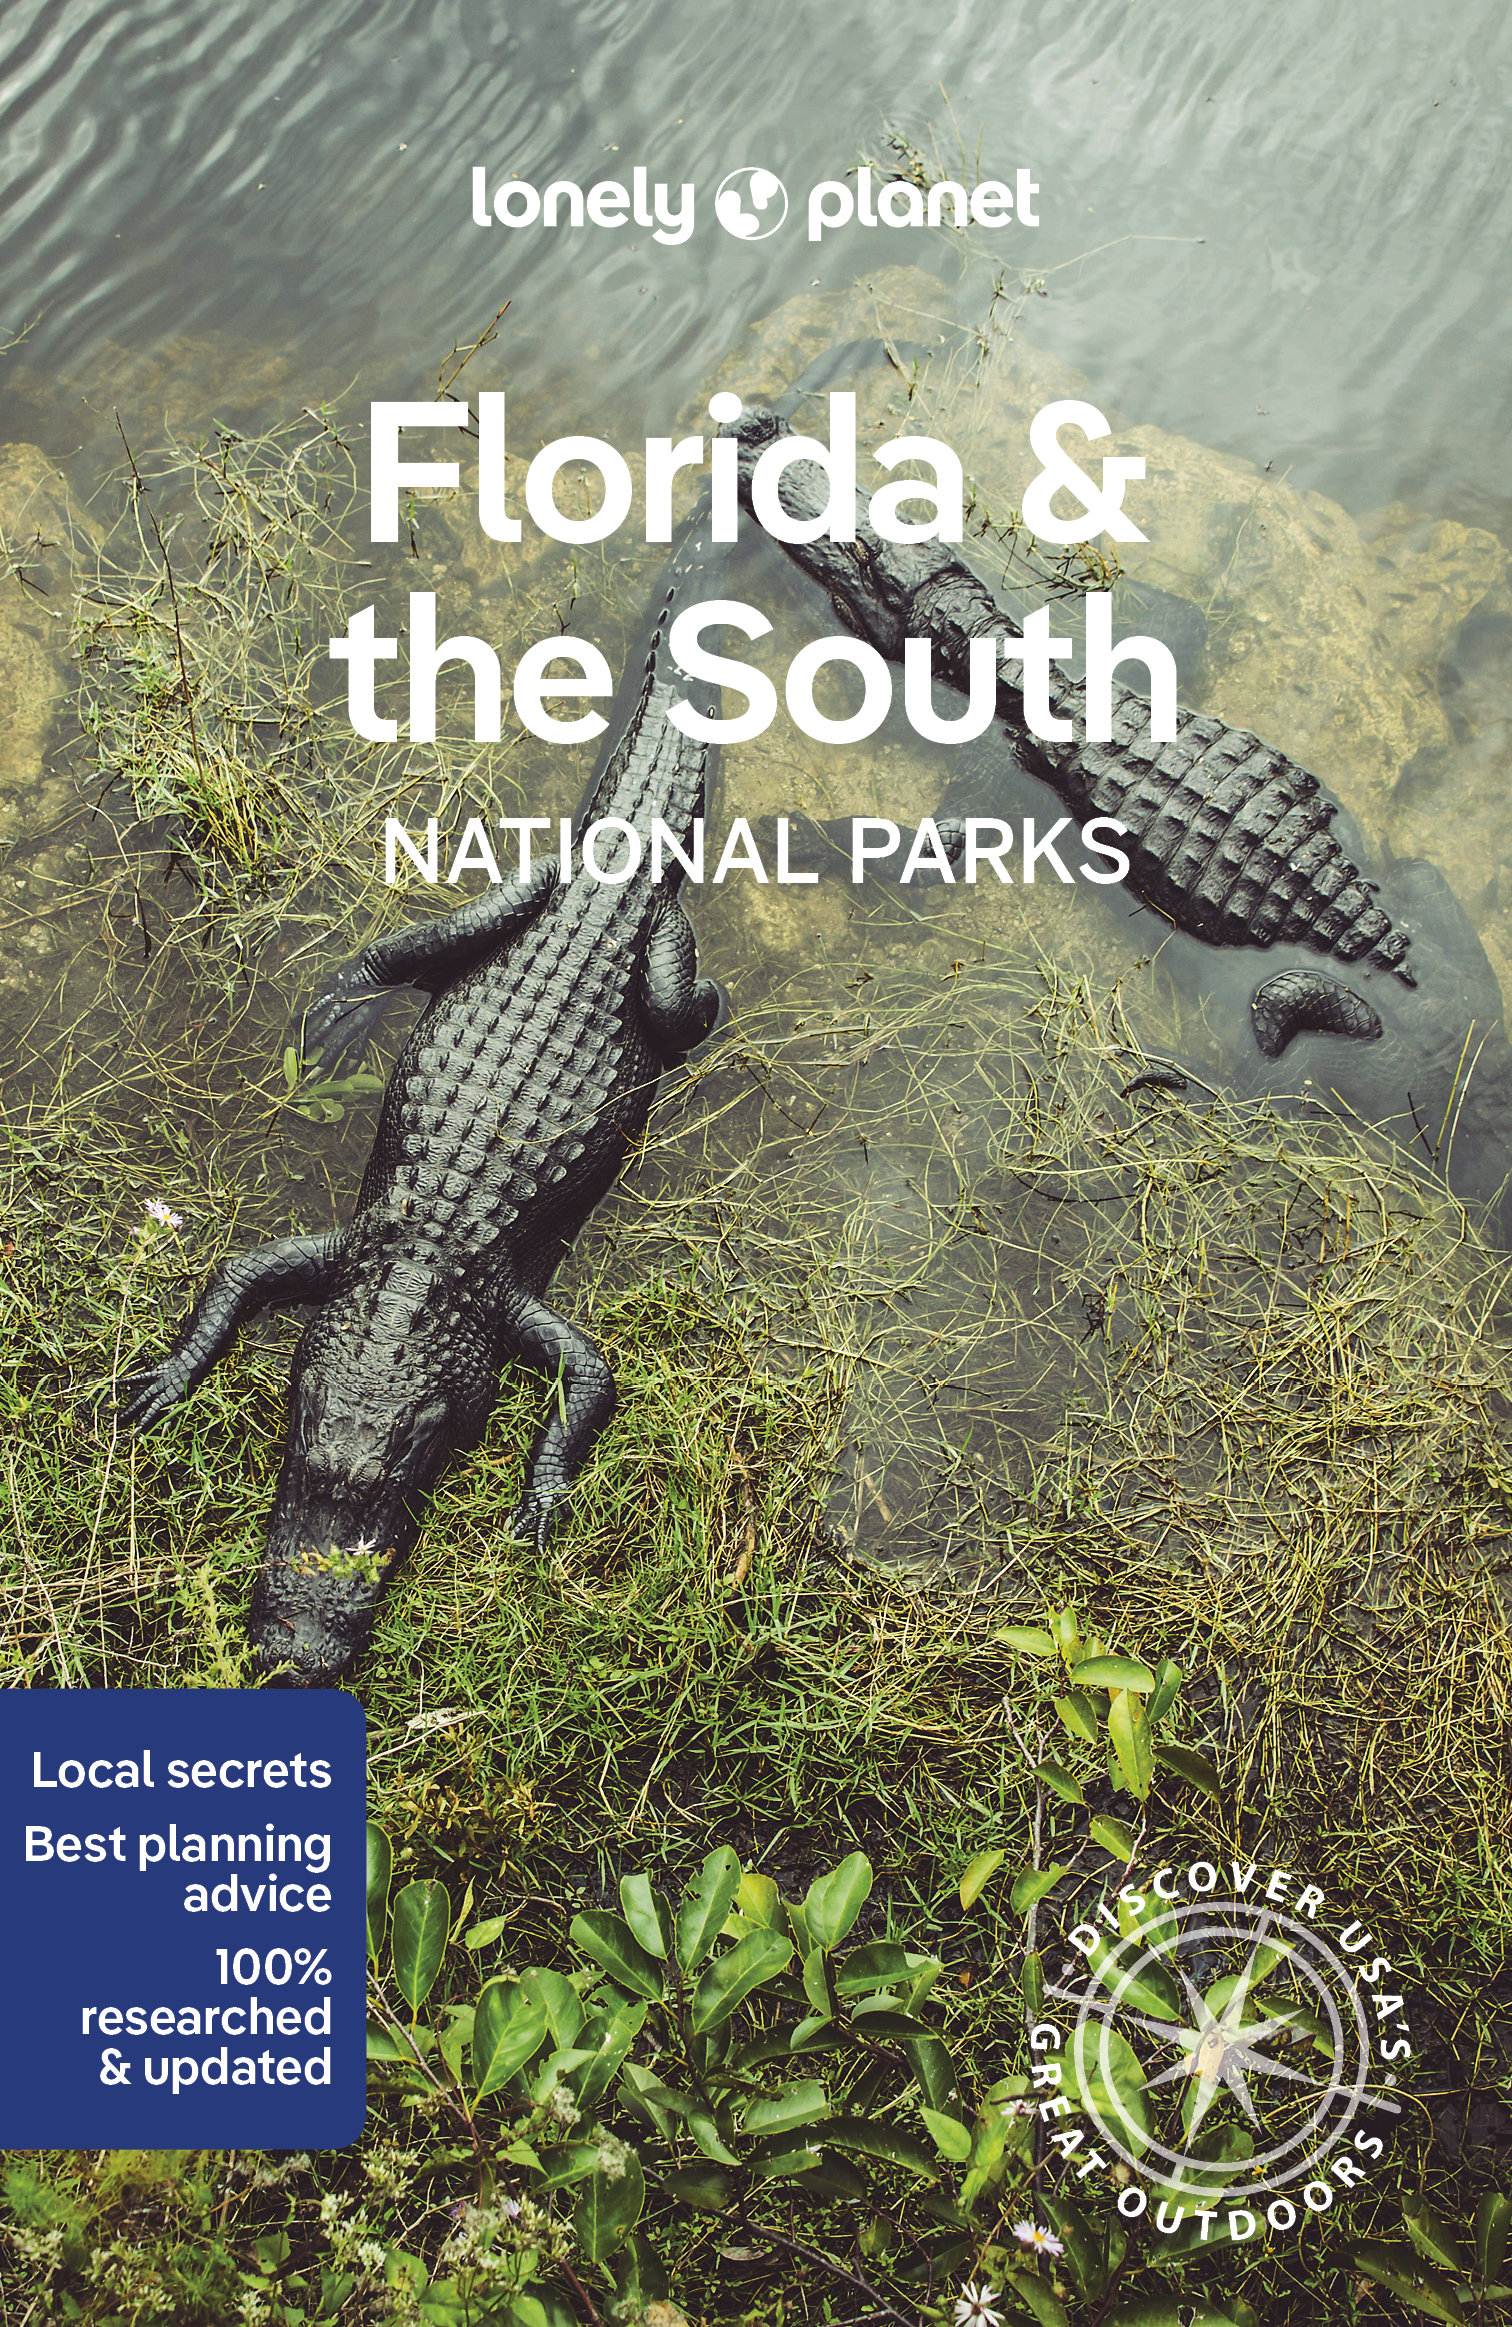 Parks　Florida　South's　Lonely　National　Planet　the